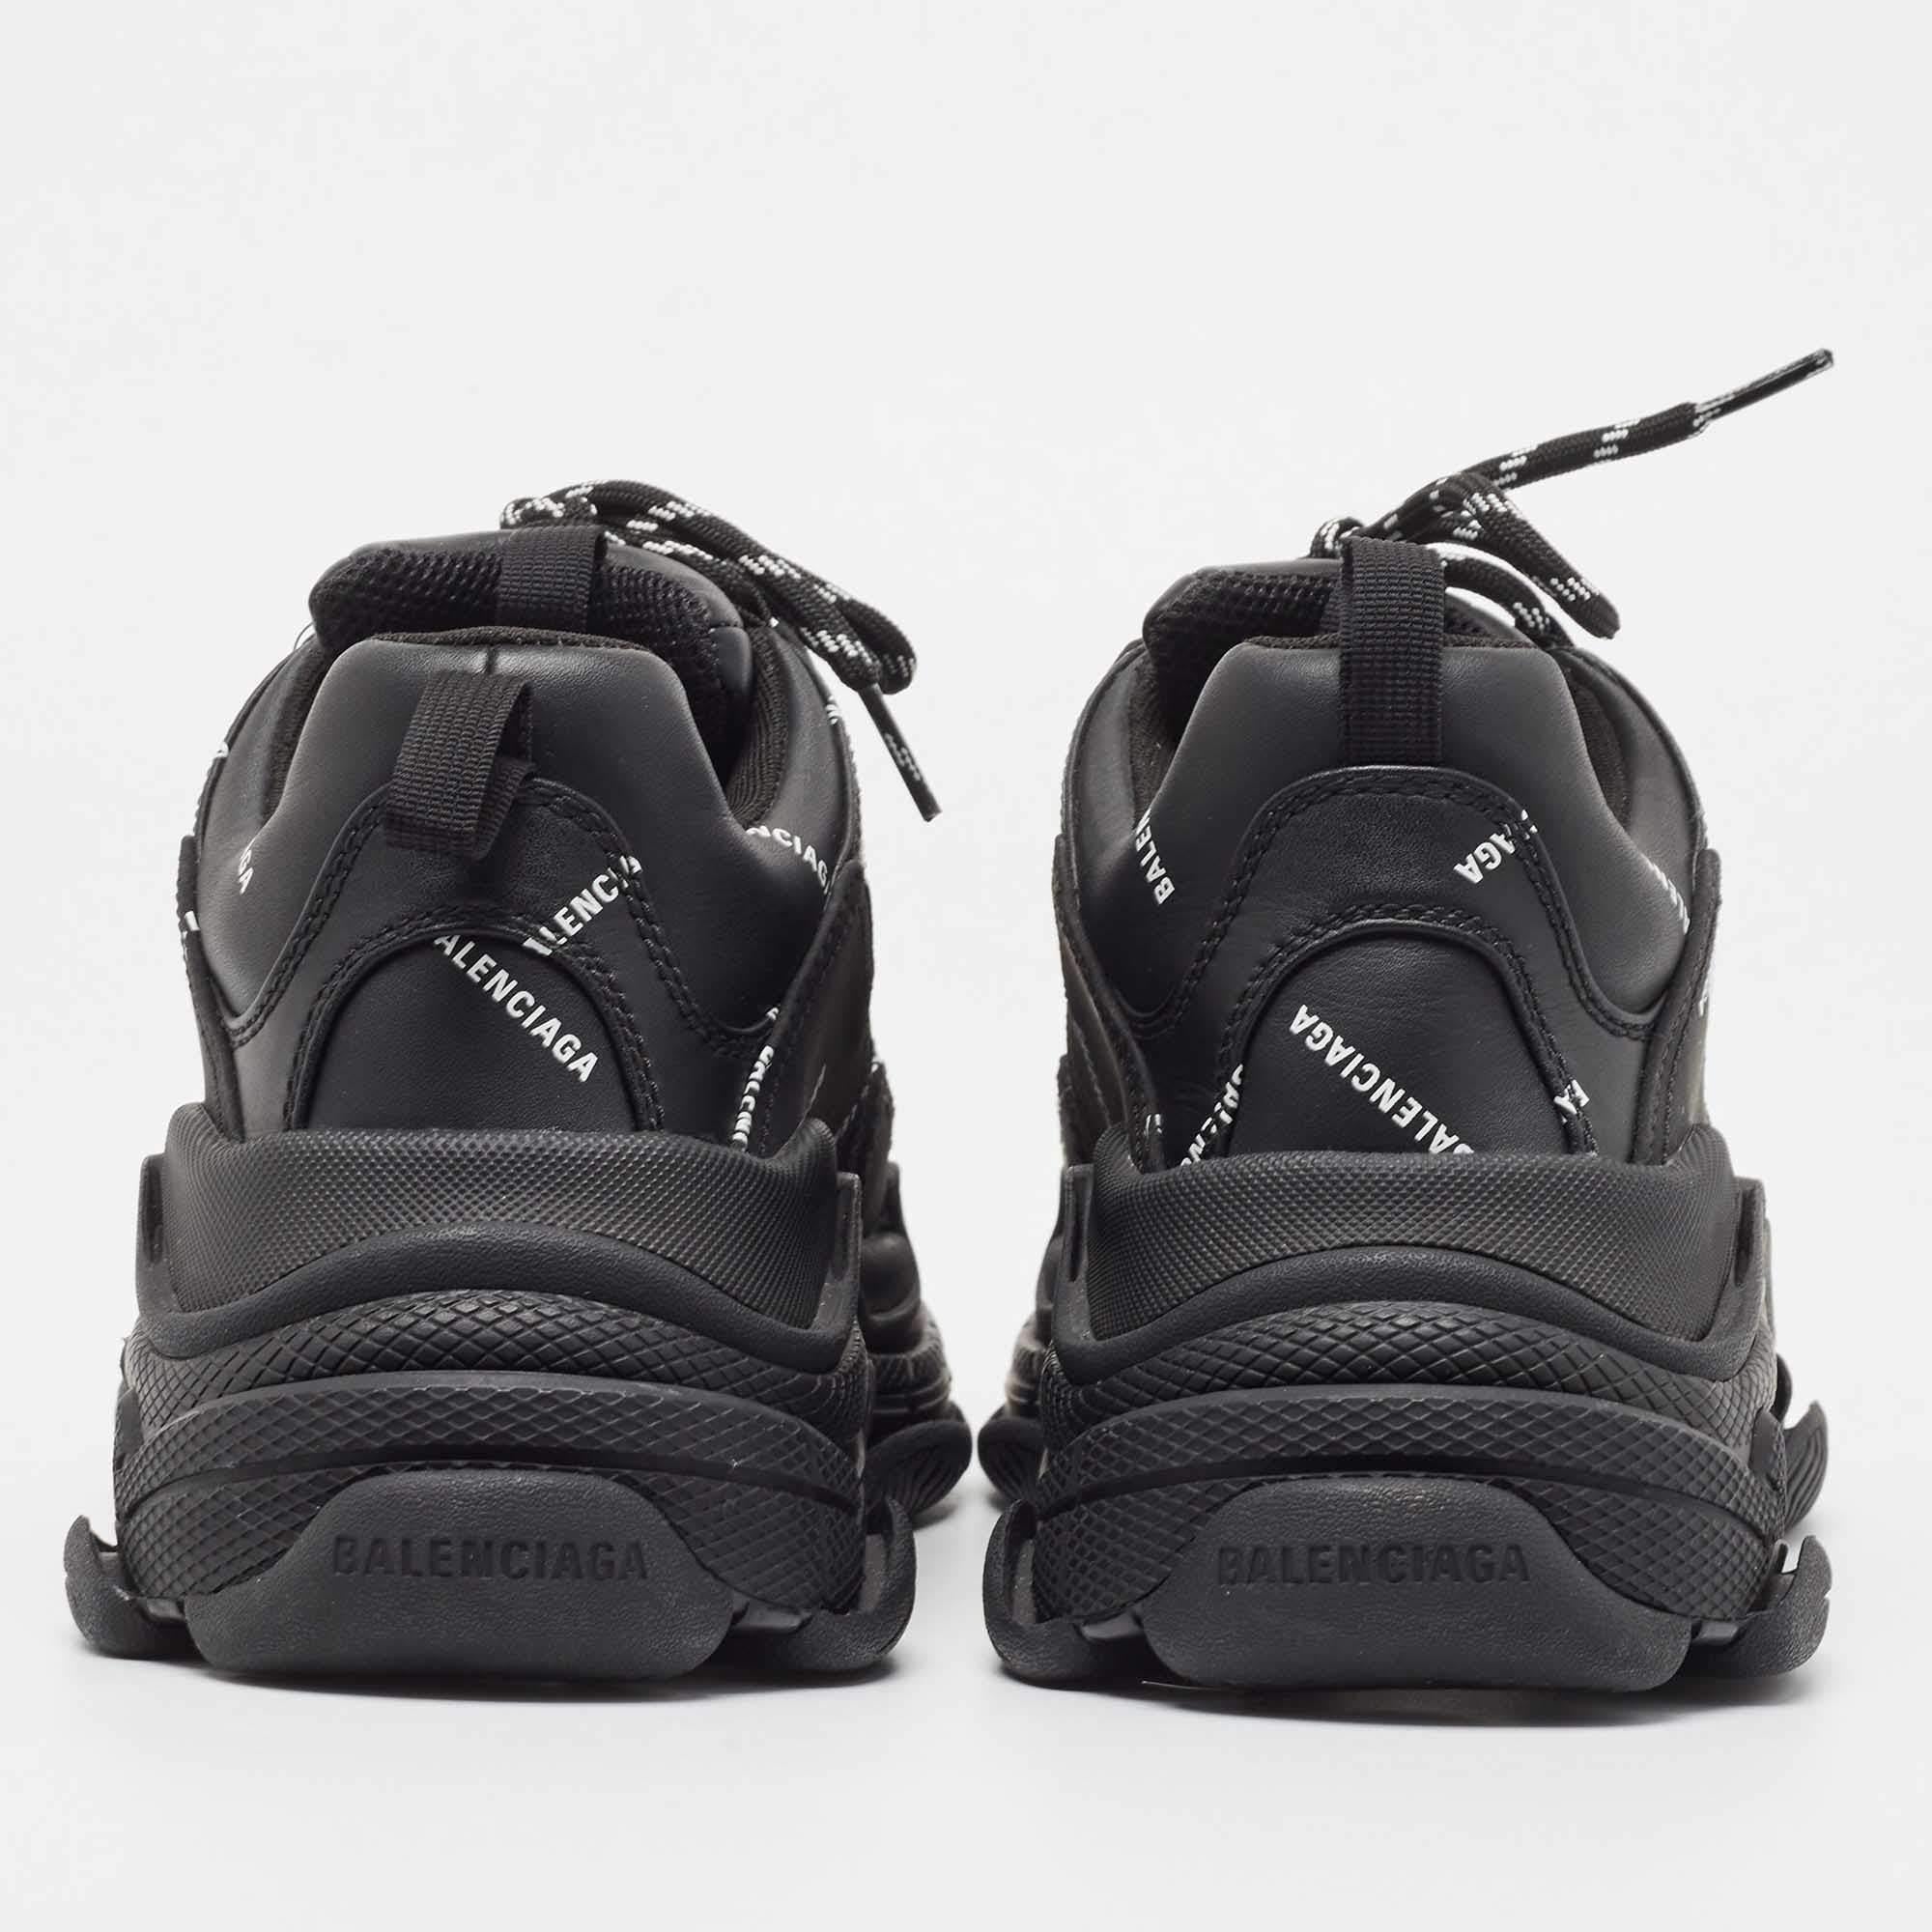 Balenciaga Black Leather and Nubuck Allover Logo Triple S Sneakers Size 40 For Sale 1